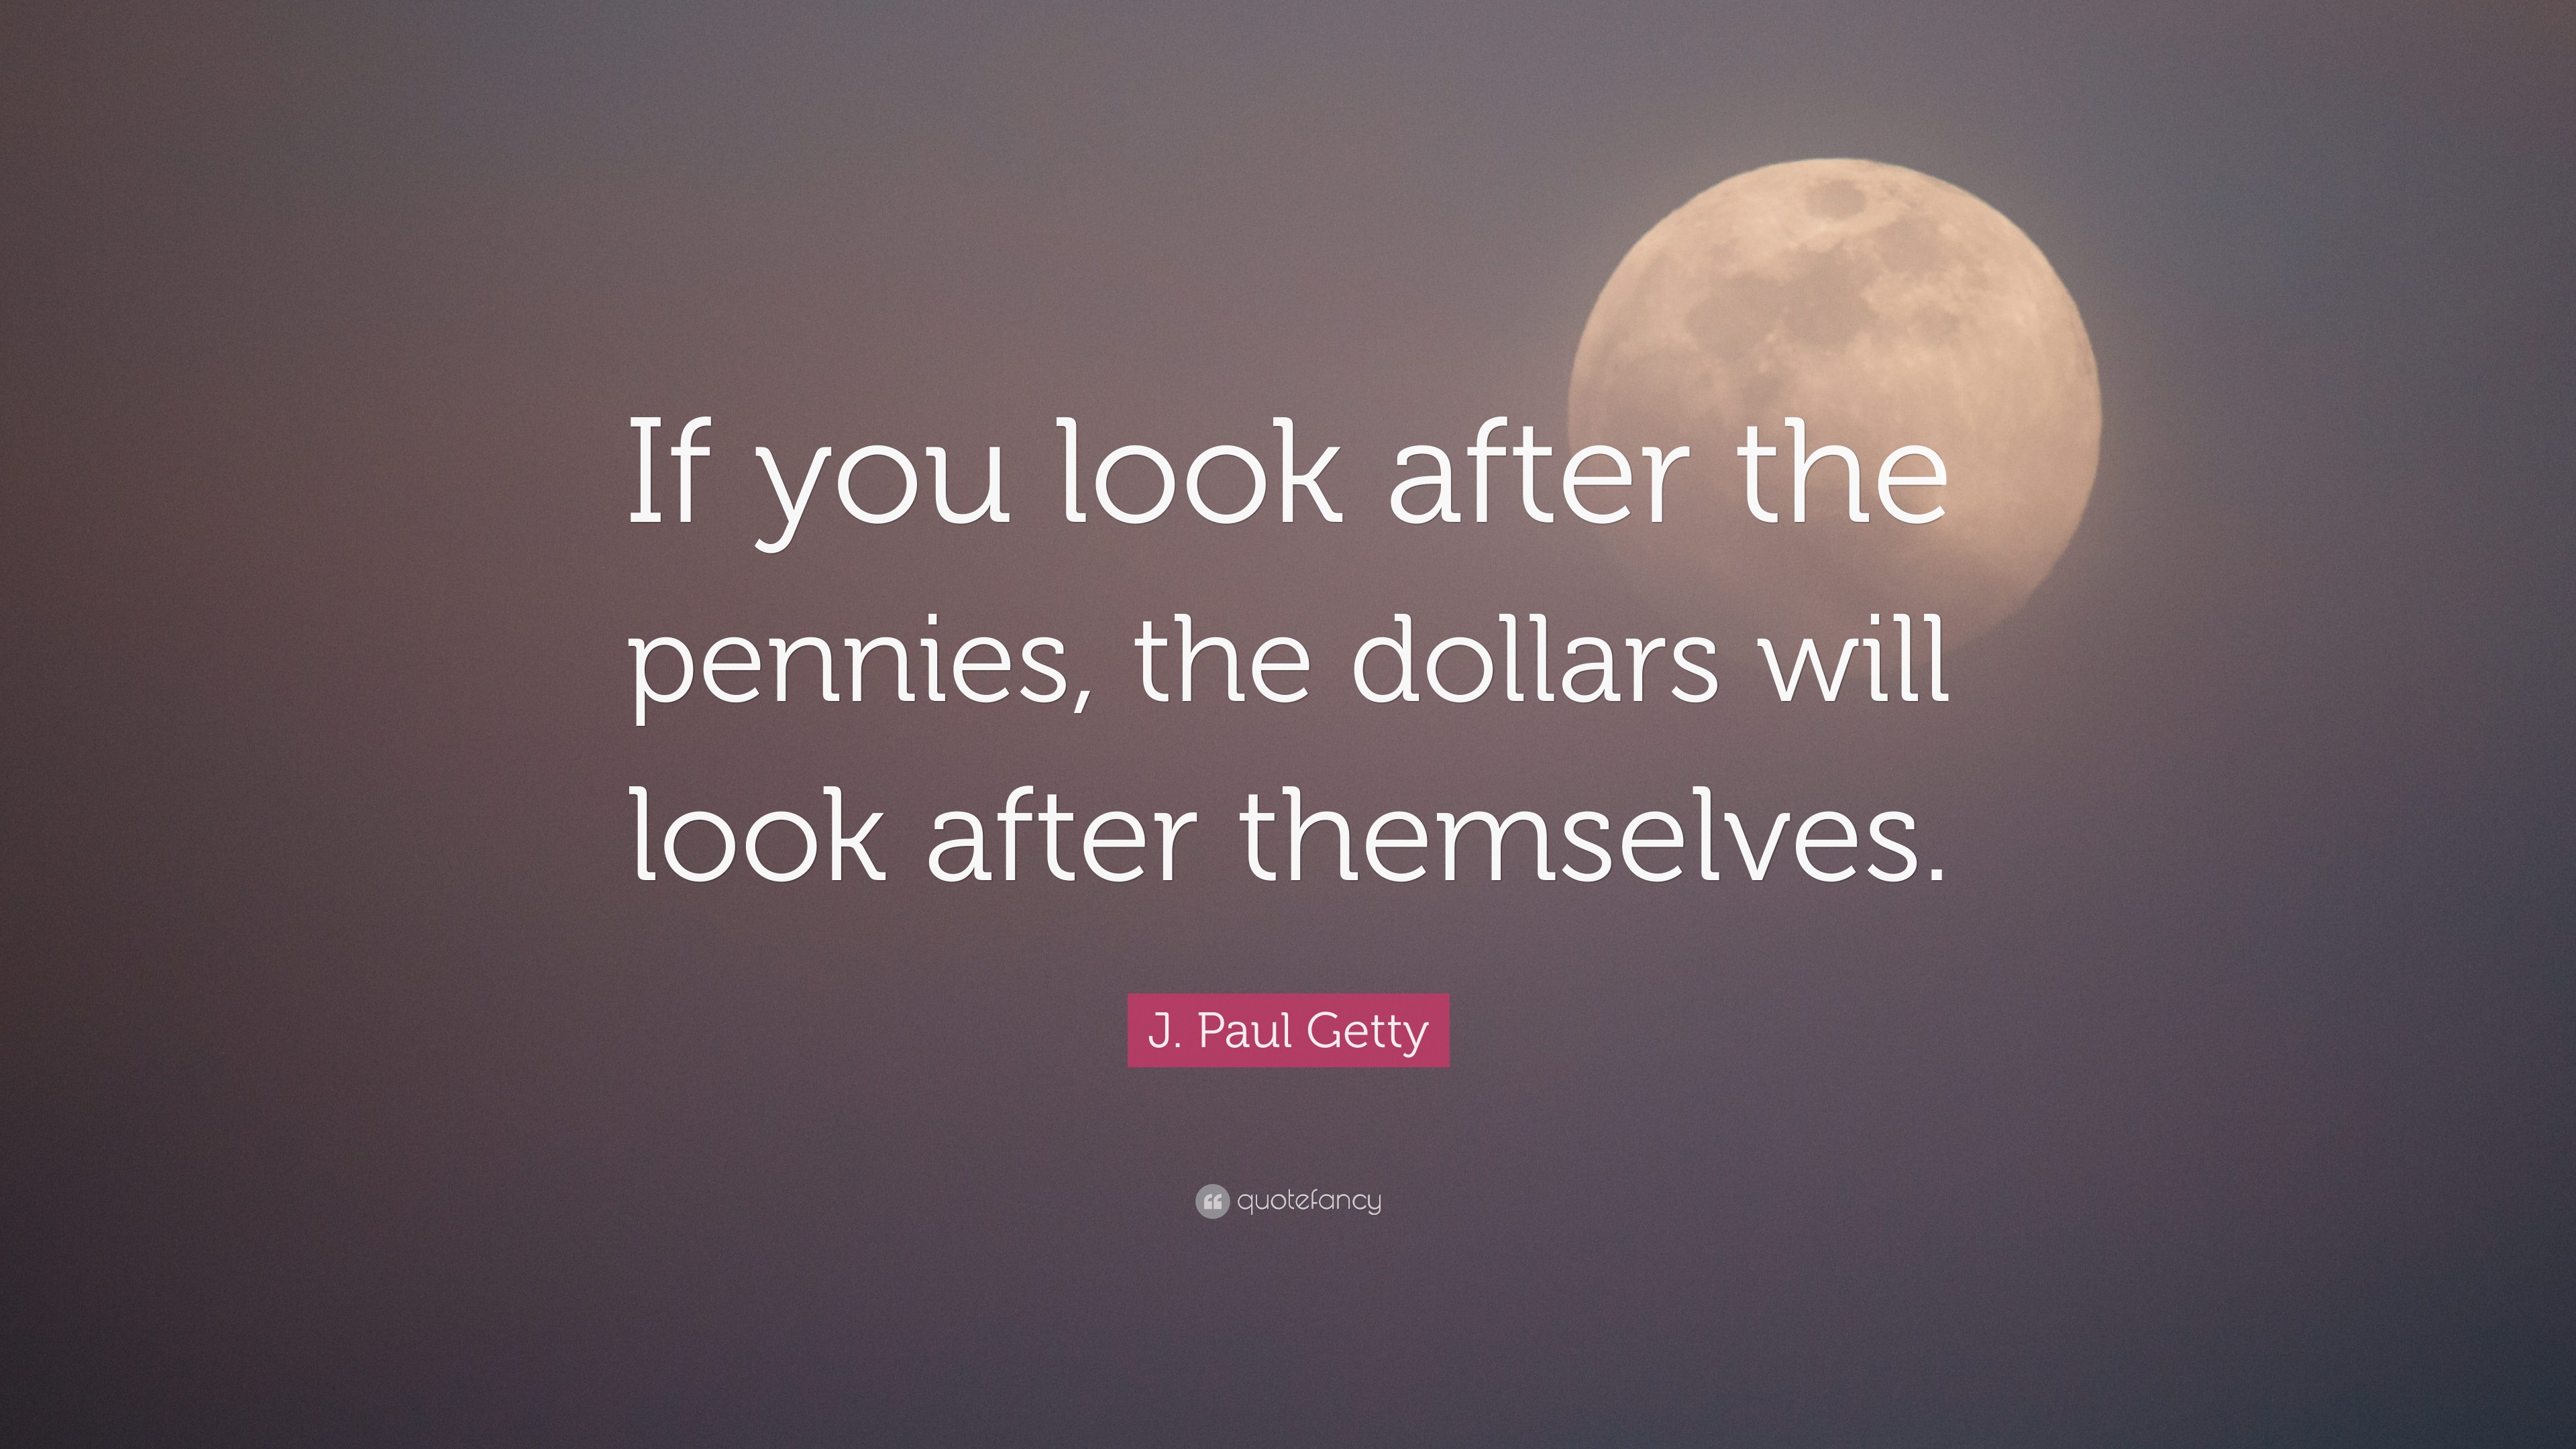 J. Paul Getty Quote: “If you look after the pennies, the dollars will